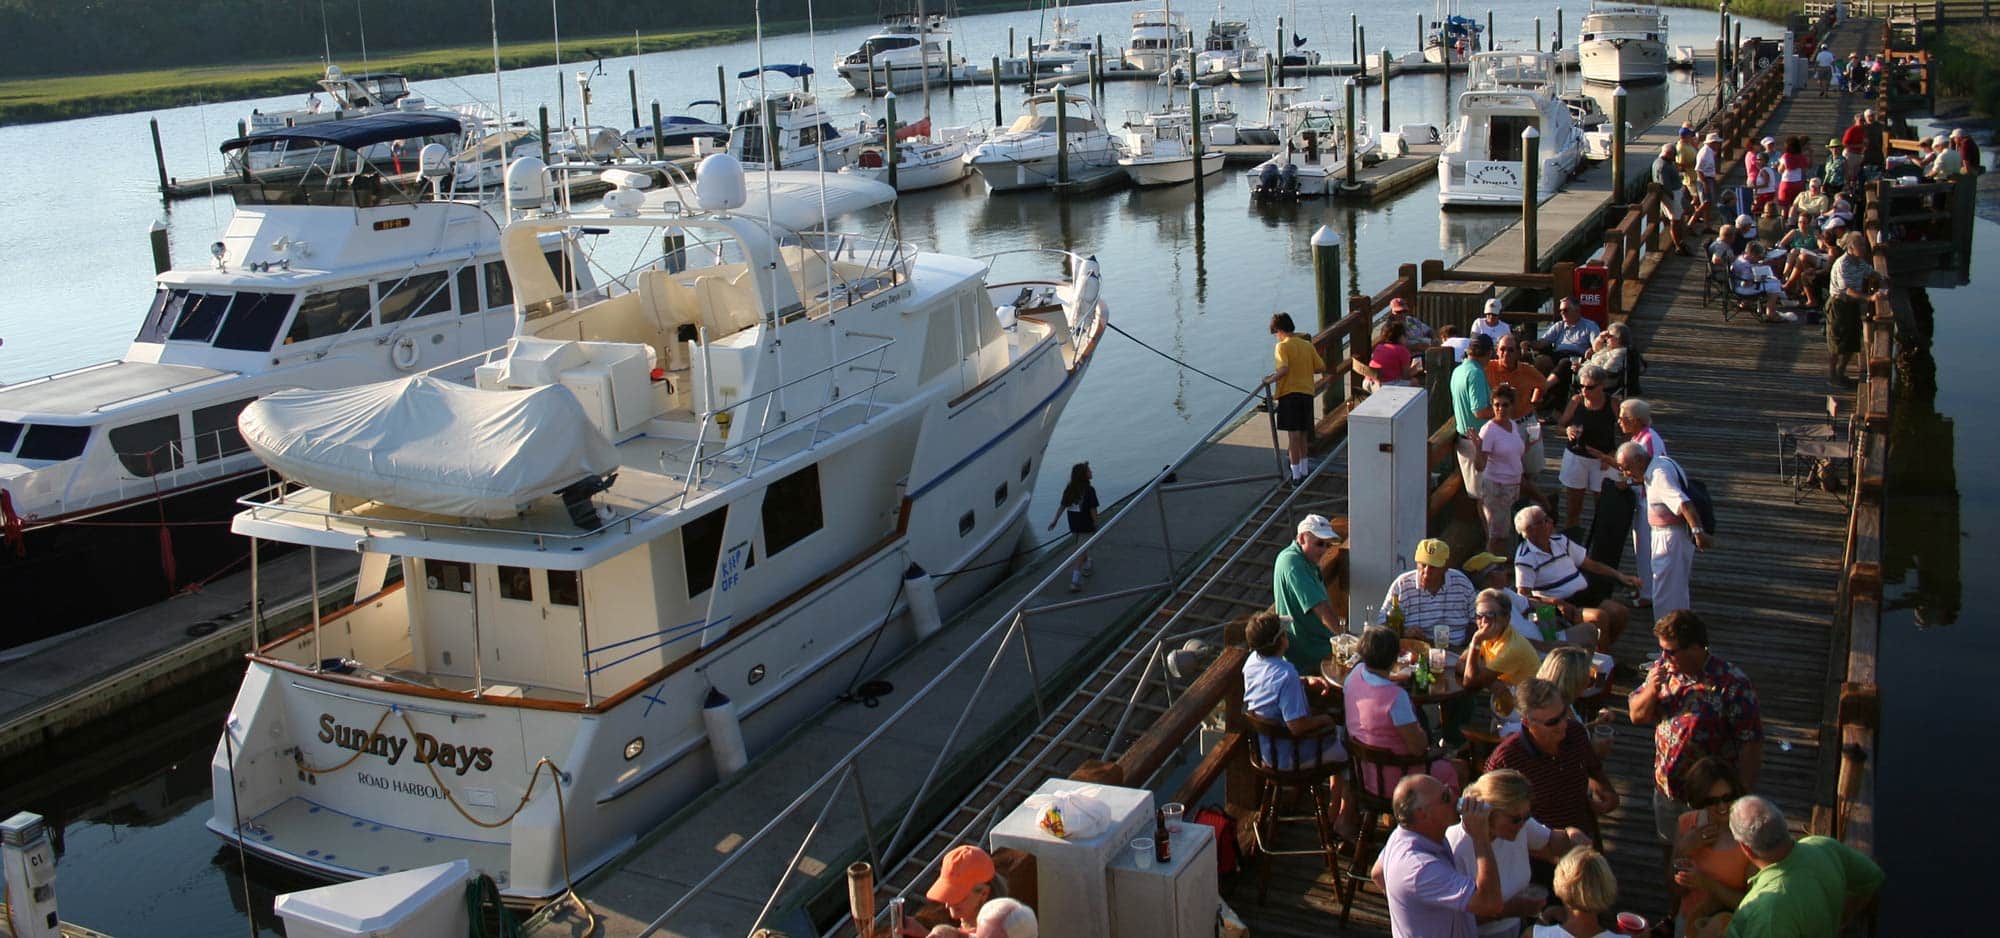 The Landings Association supports an evening dockside gathering at one of its marinas.